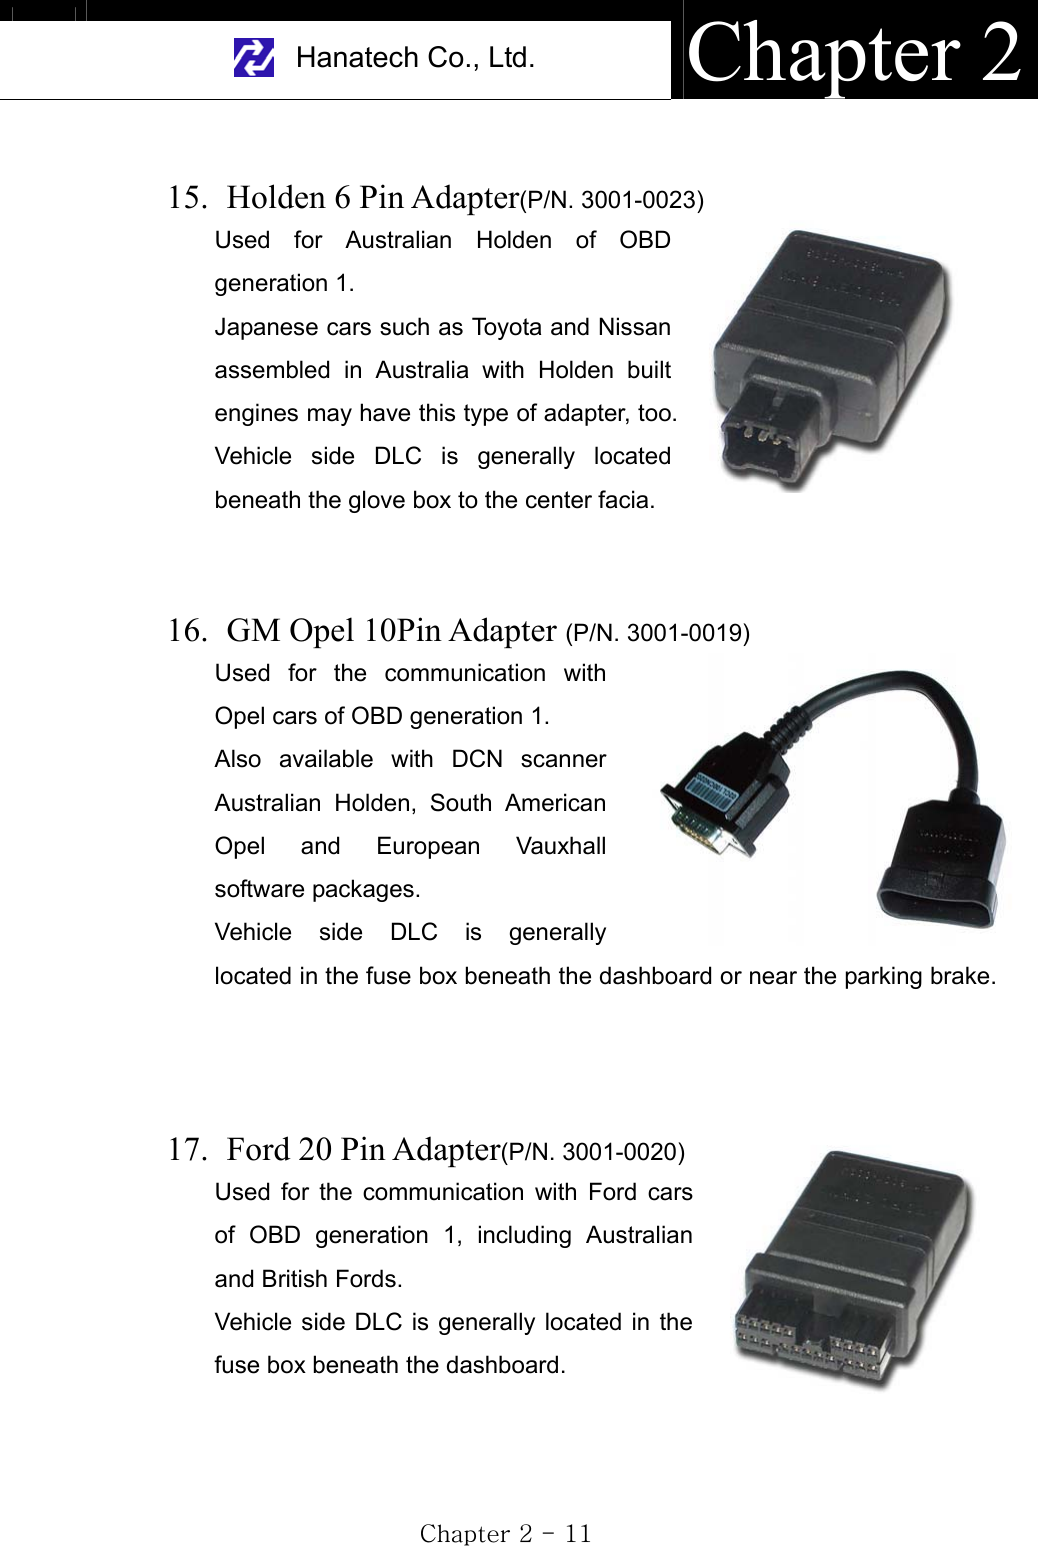 Hanatech Co., Ltd.  Chapter 2GjGYGTGXXG15.   Holden 6 Pin Adapter(P/N. 3001-0023)Used for Australian Holden of OBD generation 1. Japanese cars such as Toyota and Nissan assembled in Australia with Holden built engines may have this type of adapter, too. Vehicle side DLC is generally located beneath the glove box to the center facia. 16.   GM Opel 10Pin Adapter (P/N. 3001-0019)Used for the communication with Opel cars of OBD generation 1. Also available with DCN scanner Australian Holden, South American Opel and European Vauxhall software packages.     Vehicle side DLC is generally located in the fuse box beneath the dashboard or near the parking brake. 17.   Ford  20  Pin  Adapter(P/N. 3001-0020)Used for the communication with Ford cars of OBD generation 1, including Australian and British Fords.Vehicle side DLC is generally located in the fuse box beneath the dashboard.